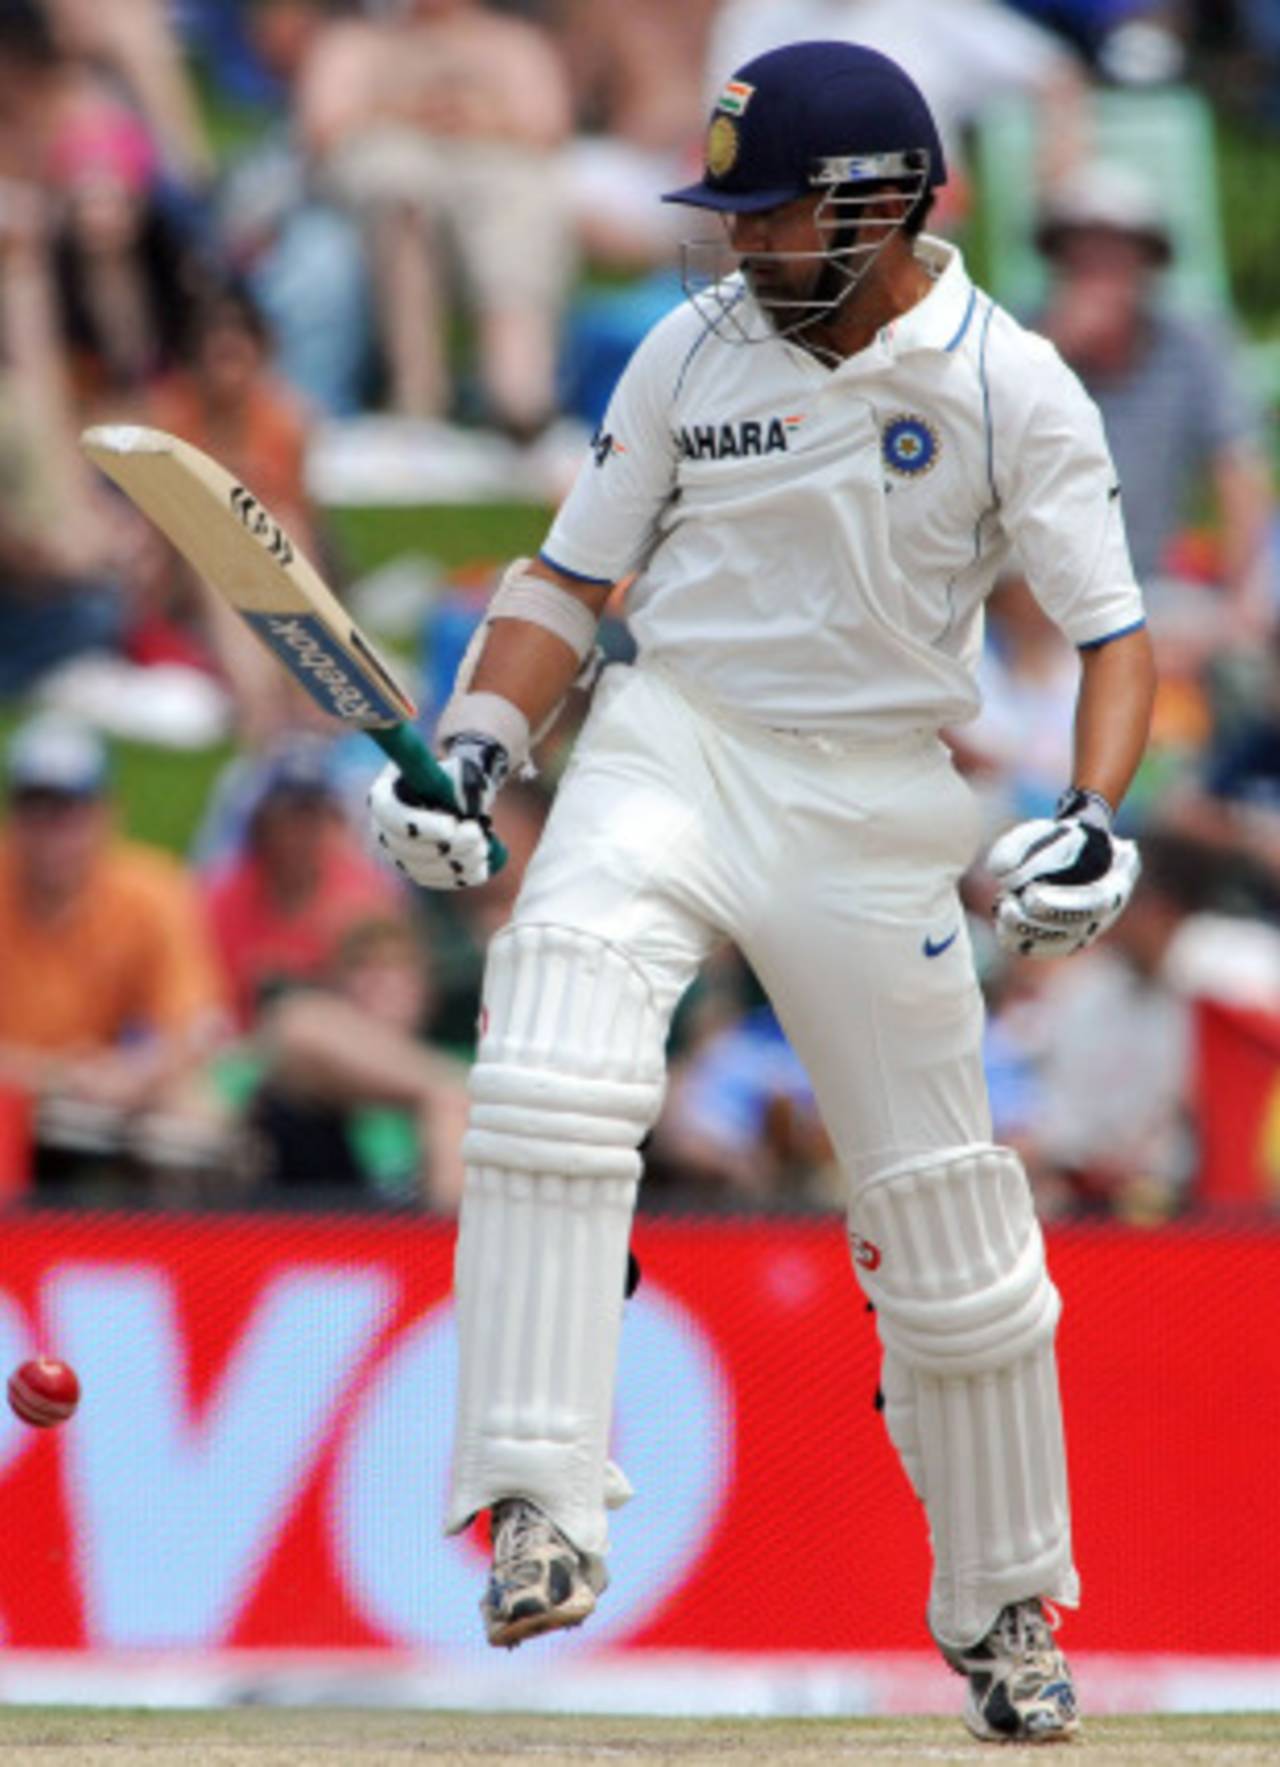 Gautam Gambhir fends off a rising delivery, South Africa v India, 1st Test, Centurion, 3rd day, December 18, 2010 